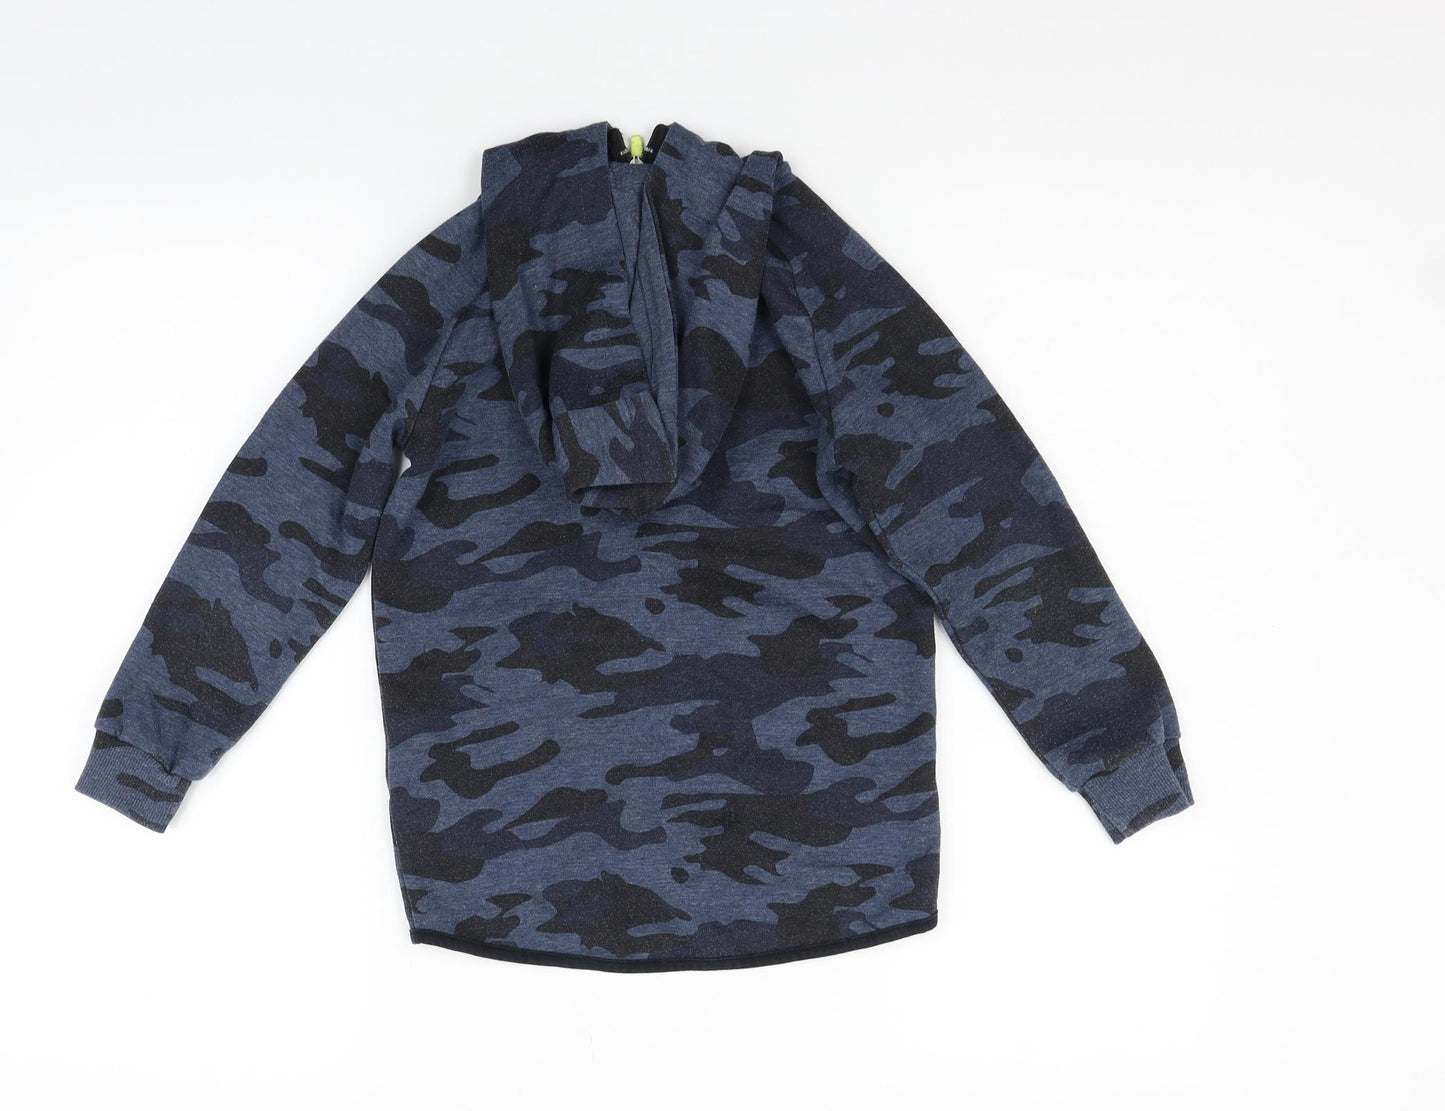 F&F Girls Blue Floral  Jacket  Size 7-8 Years  - Camo detail